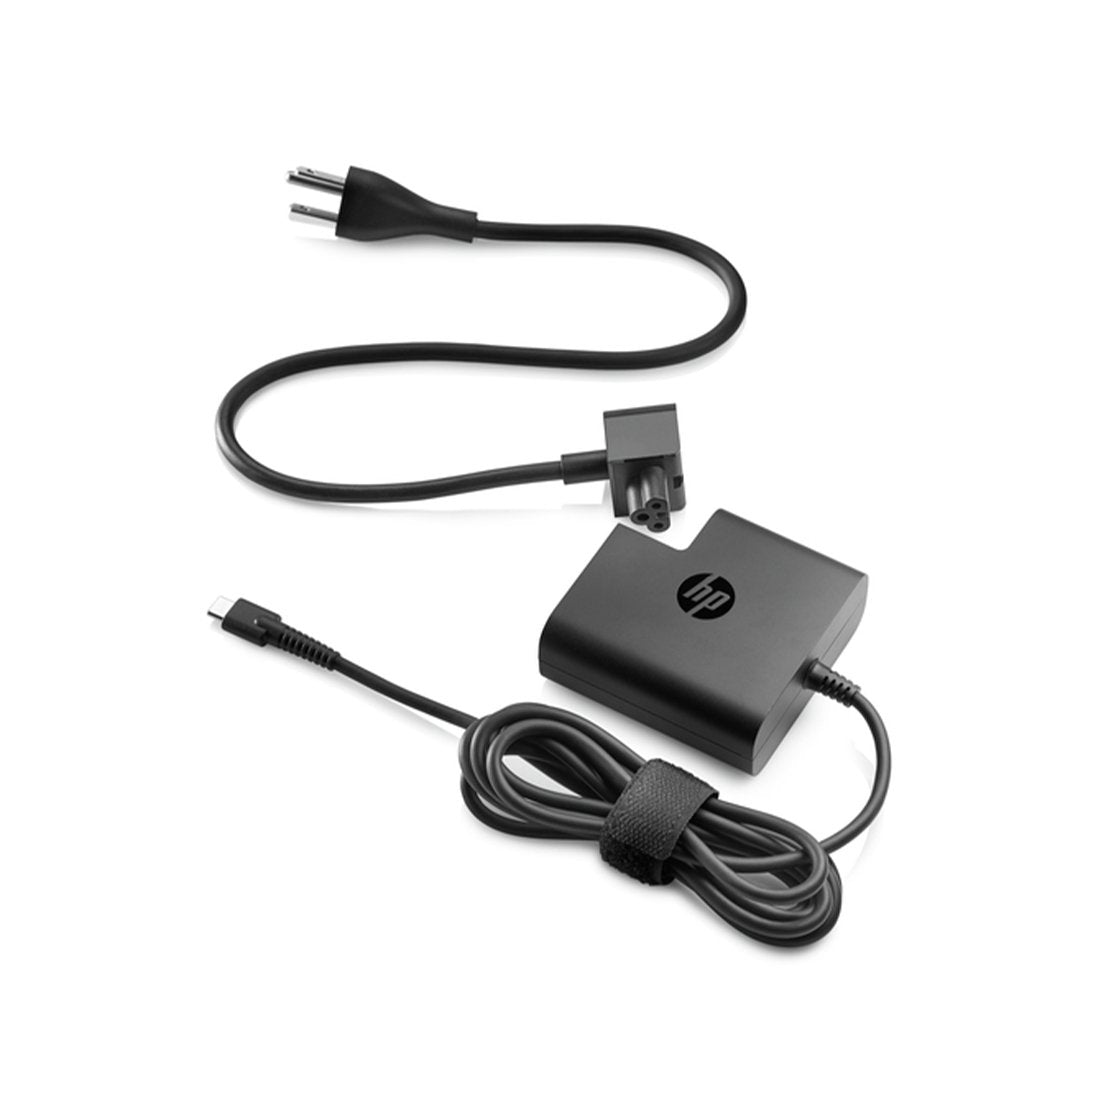 HP 1HE08AA 65W Laptop Adapter From The Peripheral Store